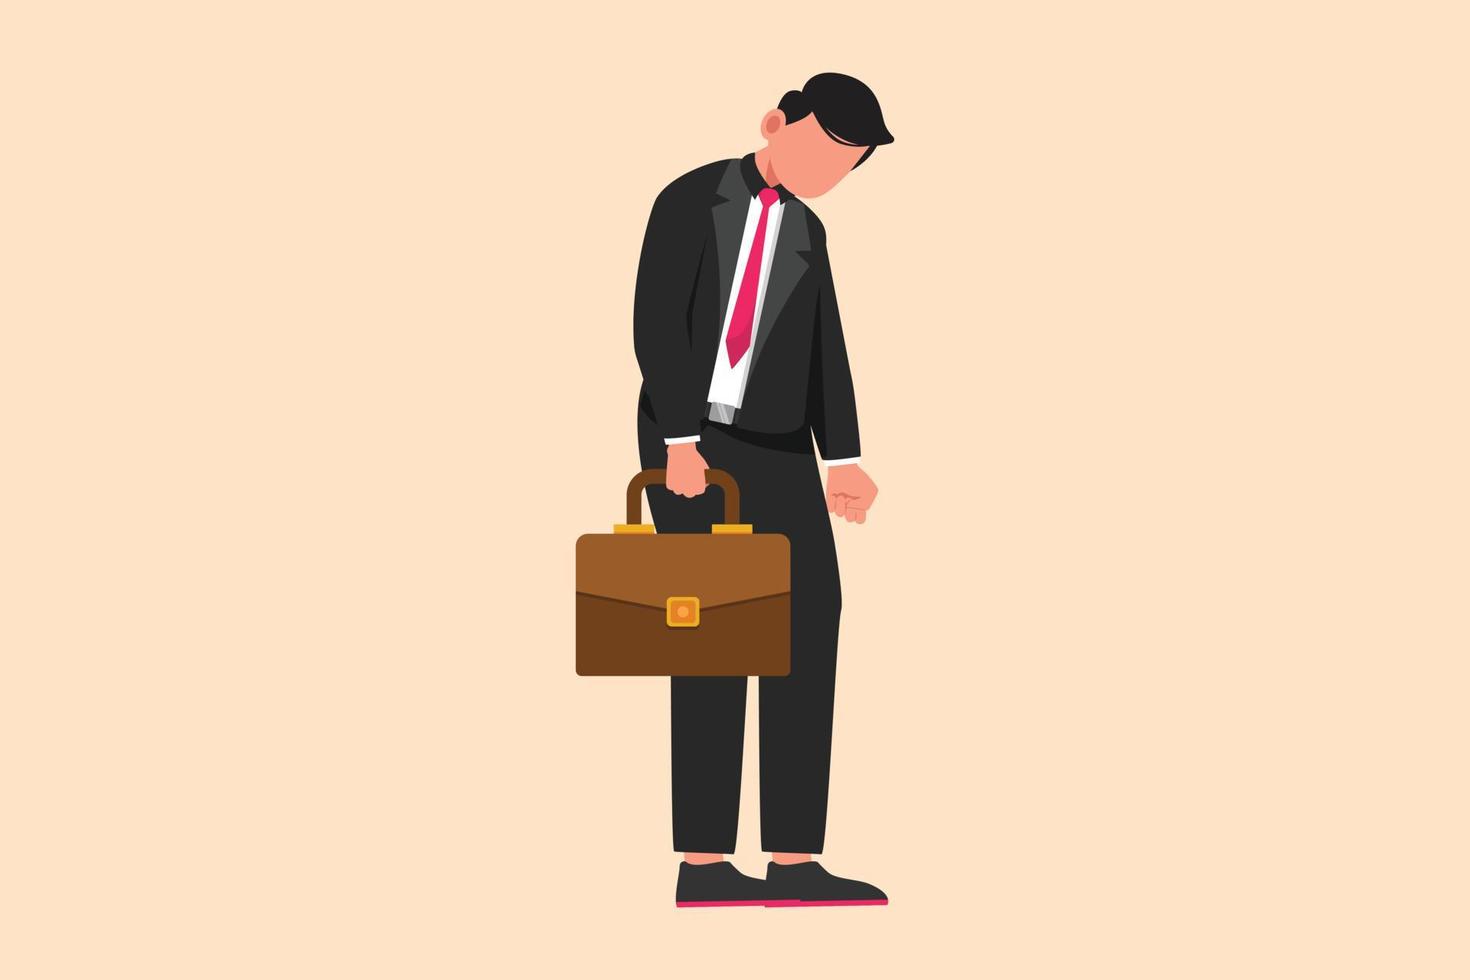 Business flat drawing sad and depressed businessman looking down, holding briefcase. Man having mental pressure or stress. Bankruptcy on global economic recession. Cartoon design vector illustration